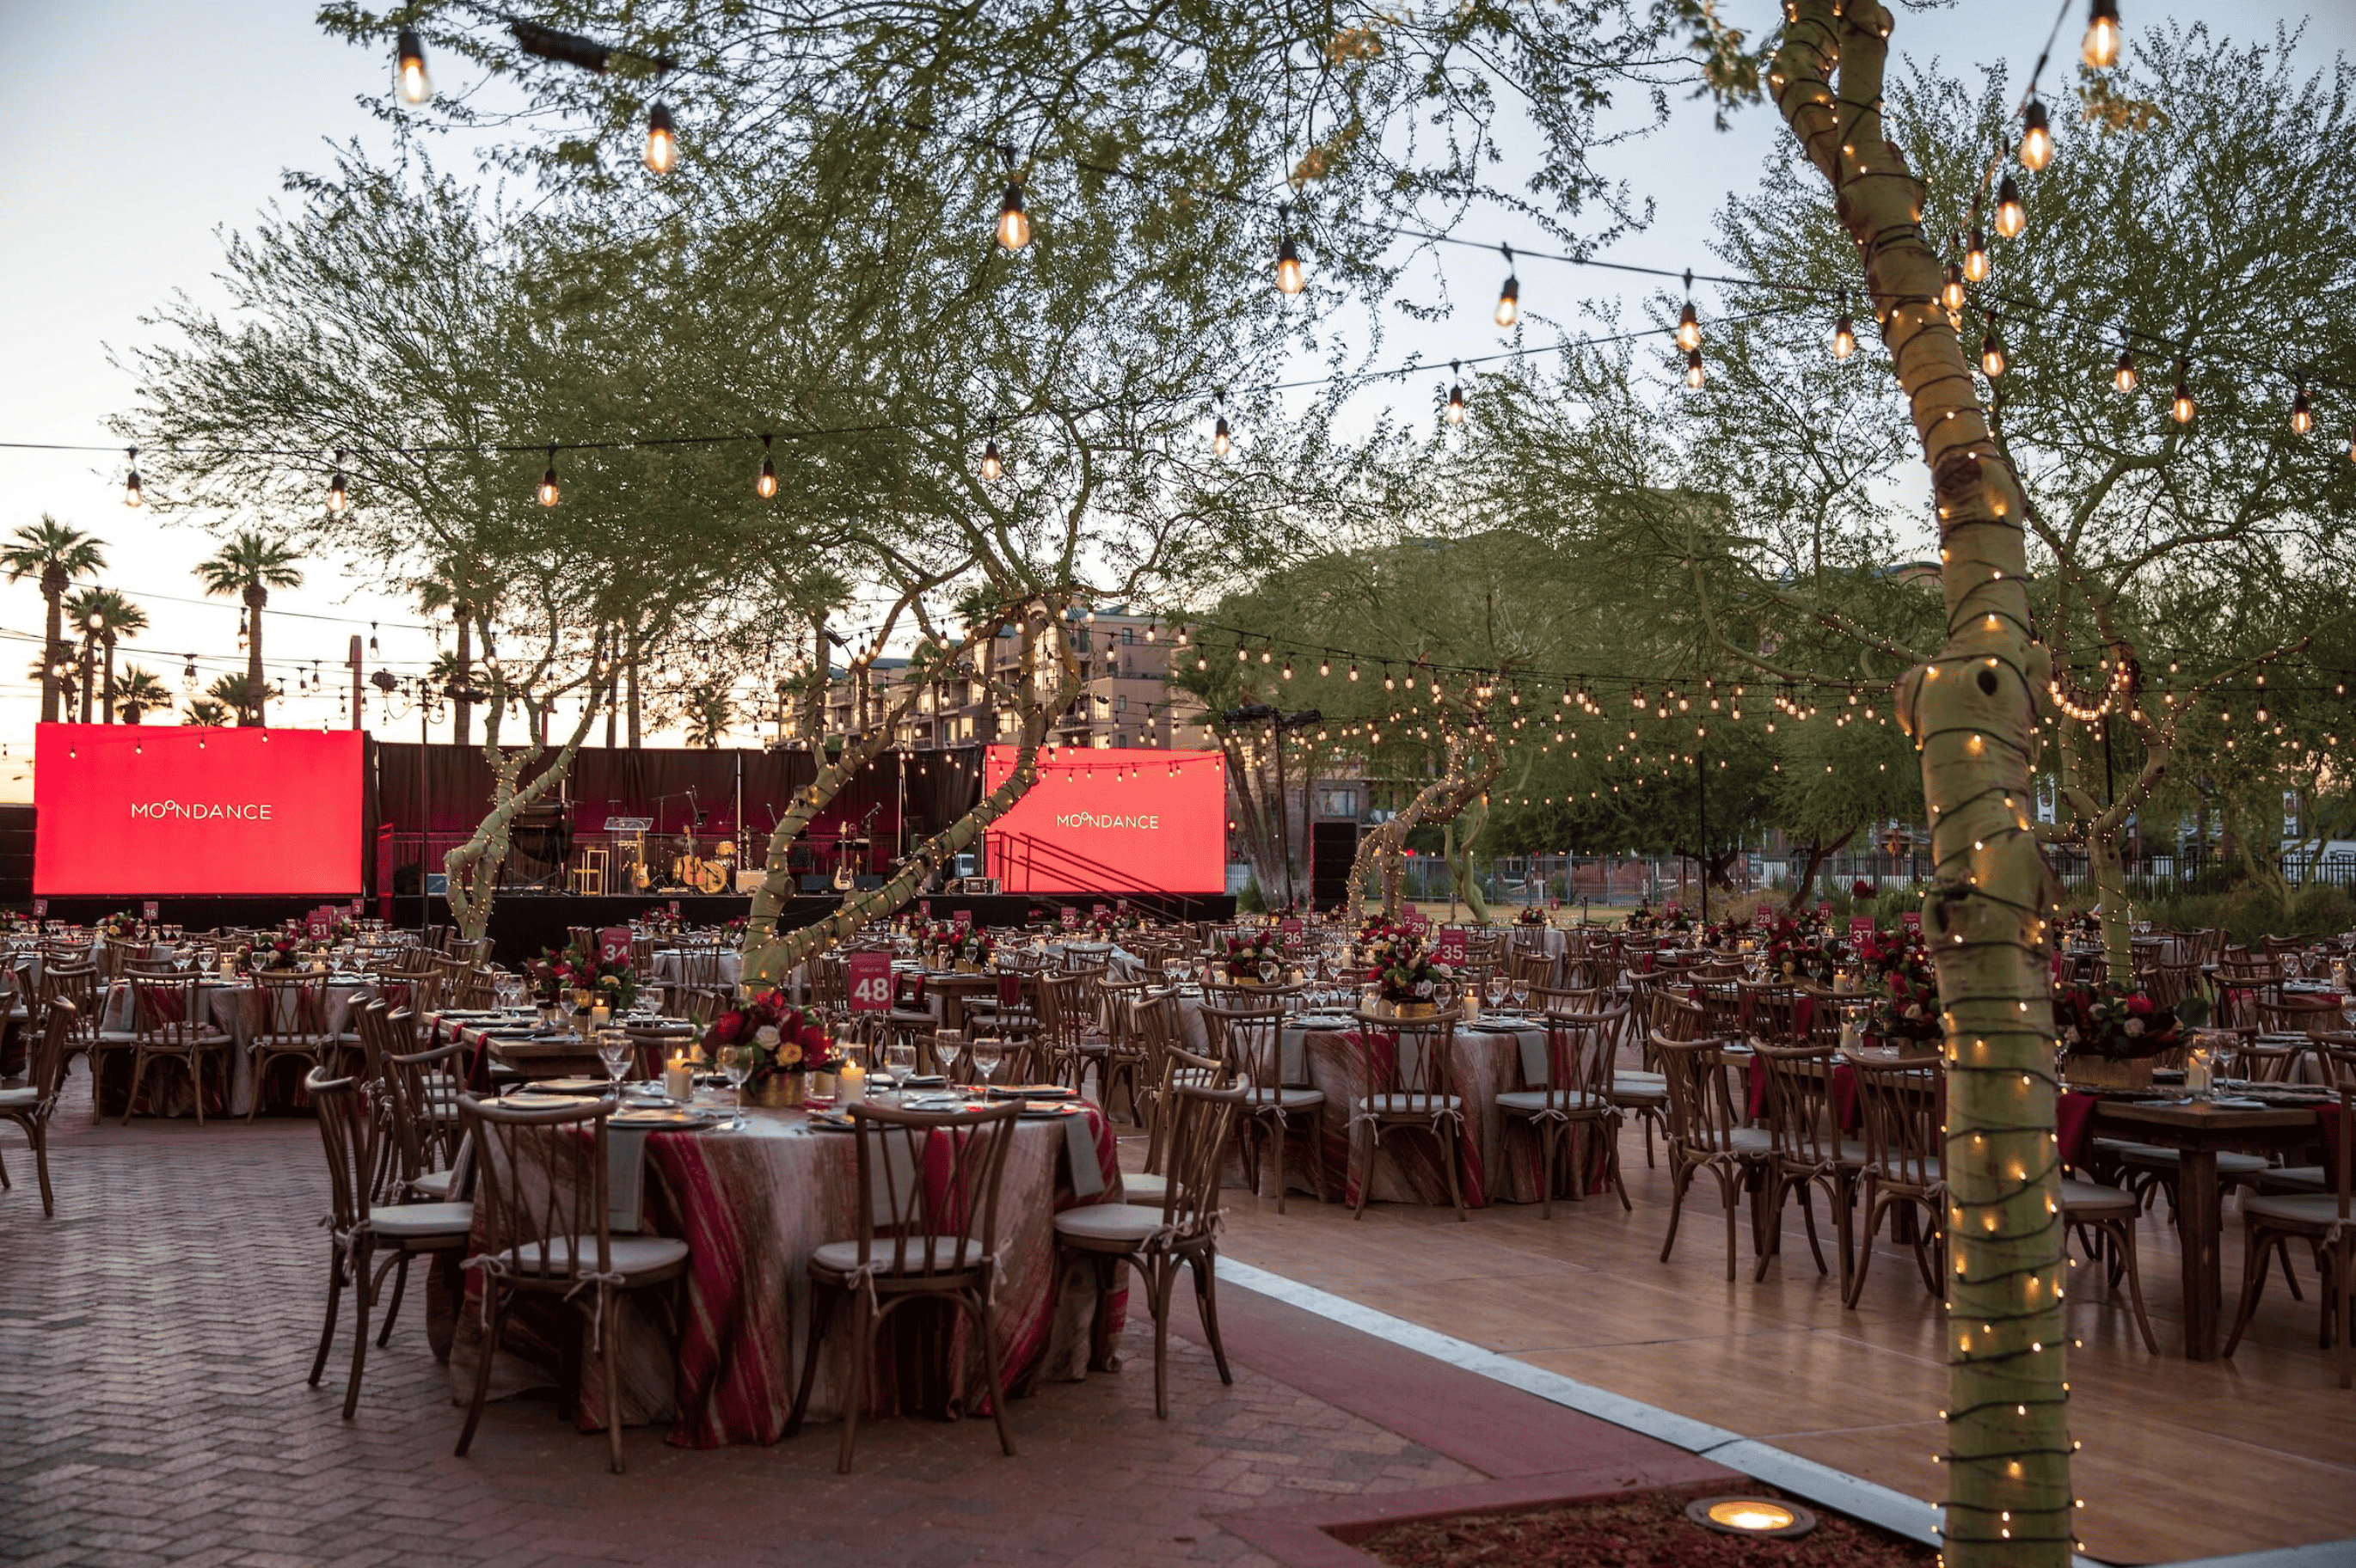 Outdoor event setup with tables and string lights at dusk, featuring a stage with screens displaying 'phoenix' during a moondance.